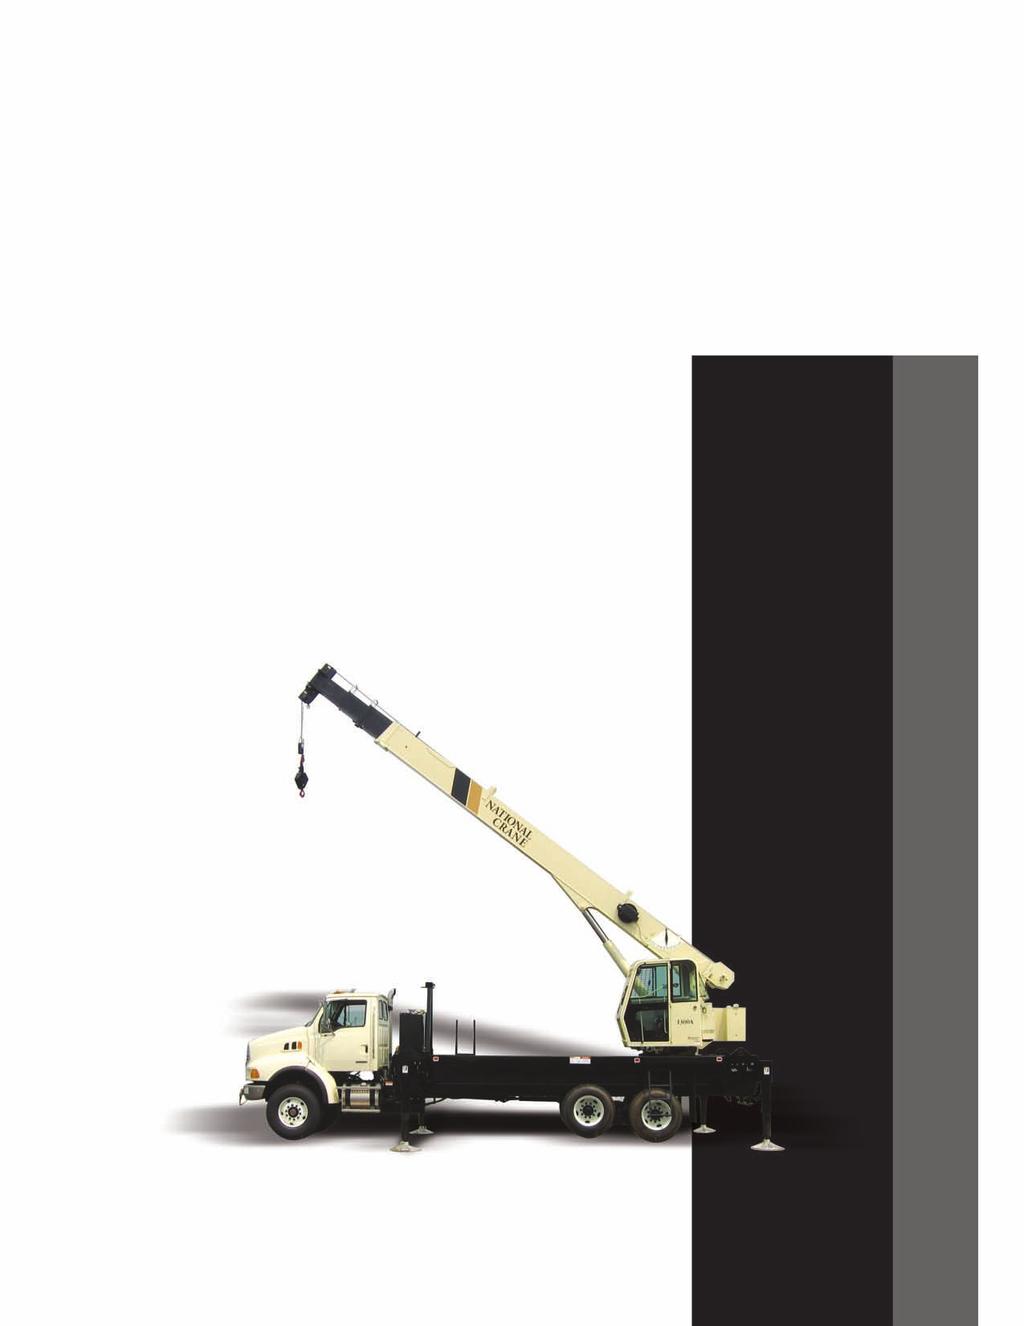 Series product guide features All New Design 110' Four-Section Boom 30 Ton Rating Self-lubricating Easy Glide Wear Pads Internal Anti-twoblock NEW VISION CAB contents Features 2 Mounting